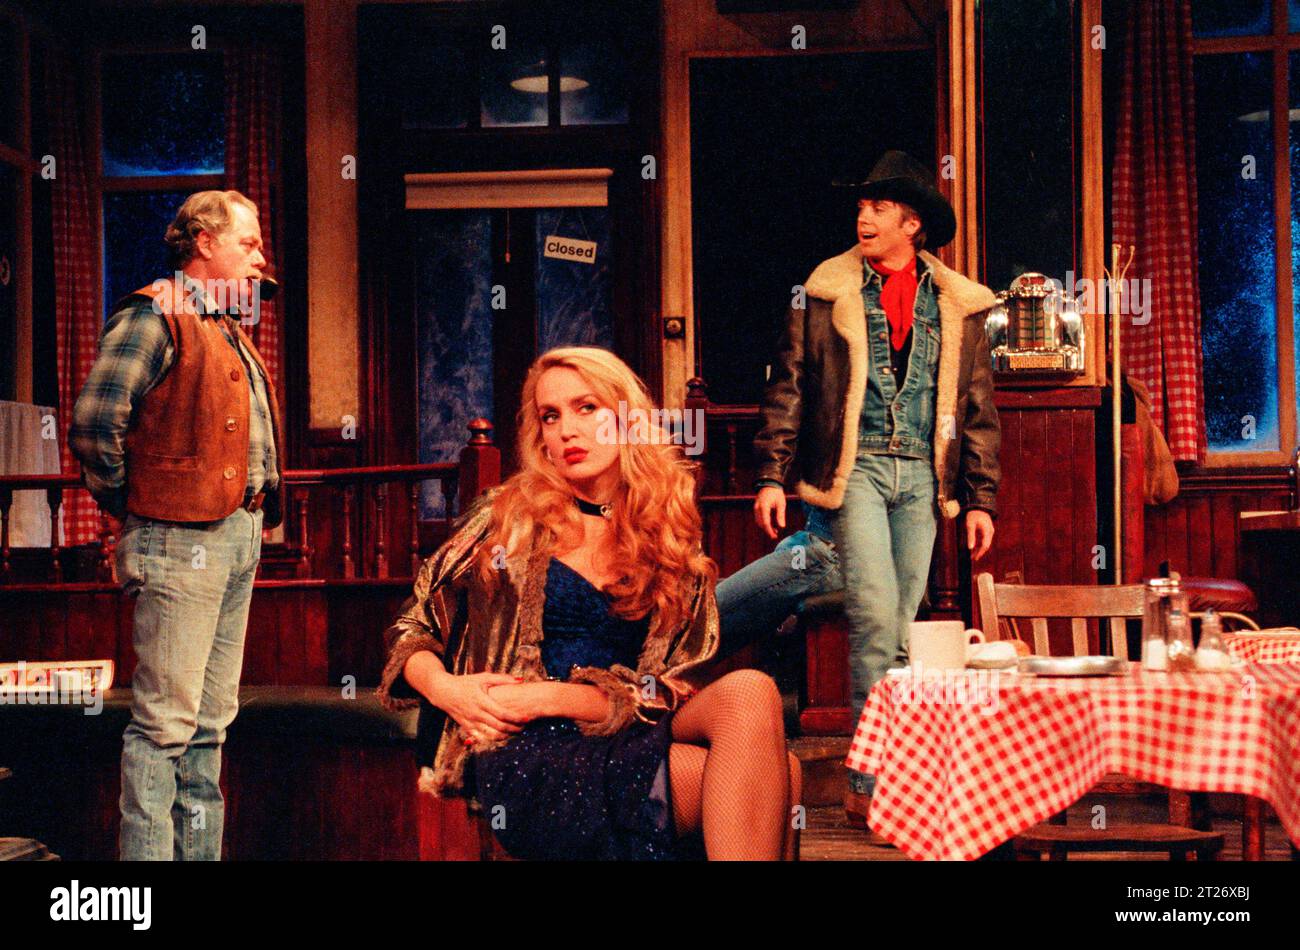 l-r: Bill Bailey (Will Masters), Jerry Hall (Cherie), Shaun Cassidy (Bo Decker) in BUS STOP by William Inge at the Palace Theatre, Watford, England  02/1990  transferred to the Lyric Theatre, London W1  27/02/1990  design: Tim Goodchild  lighting: Jenny Cane  director: Phil Oesterman Stock Photo